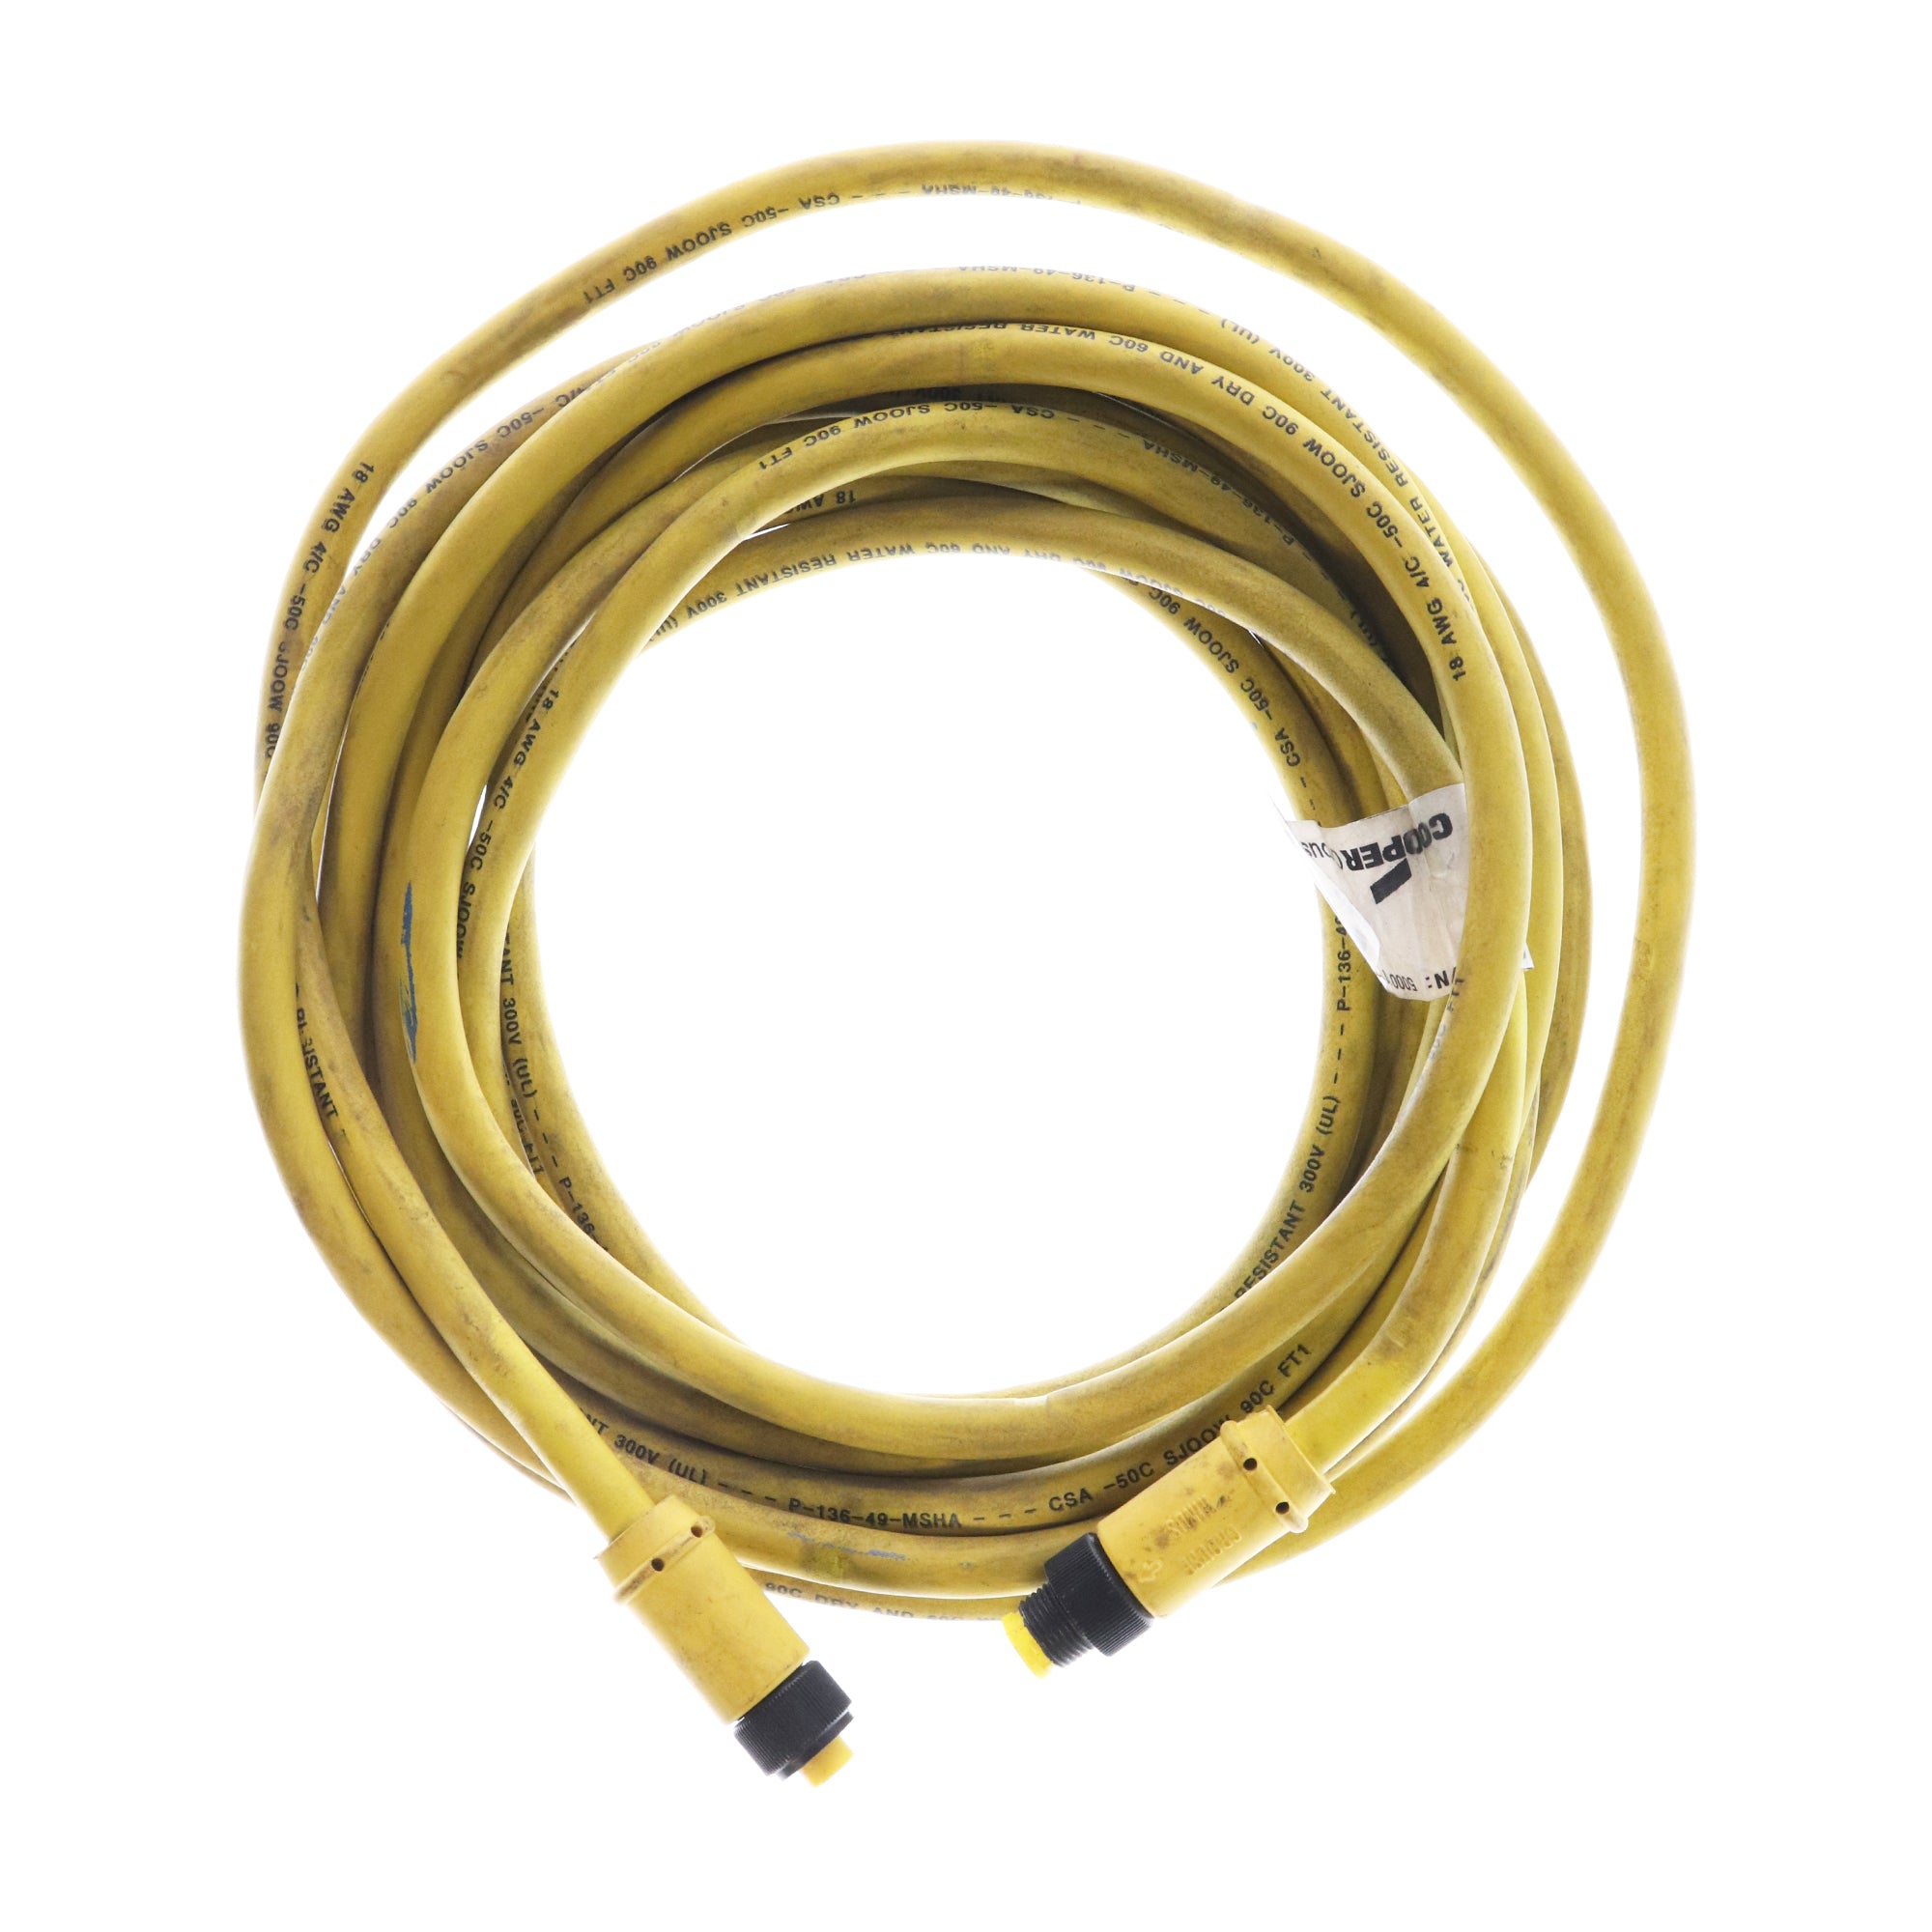 Cooper, COOPER CROUSE-HINDS 5000118-191SE MICRO-MINI 4-POLE, MALE-FEMALE CABLE ASSEMBLY